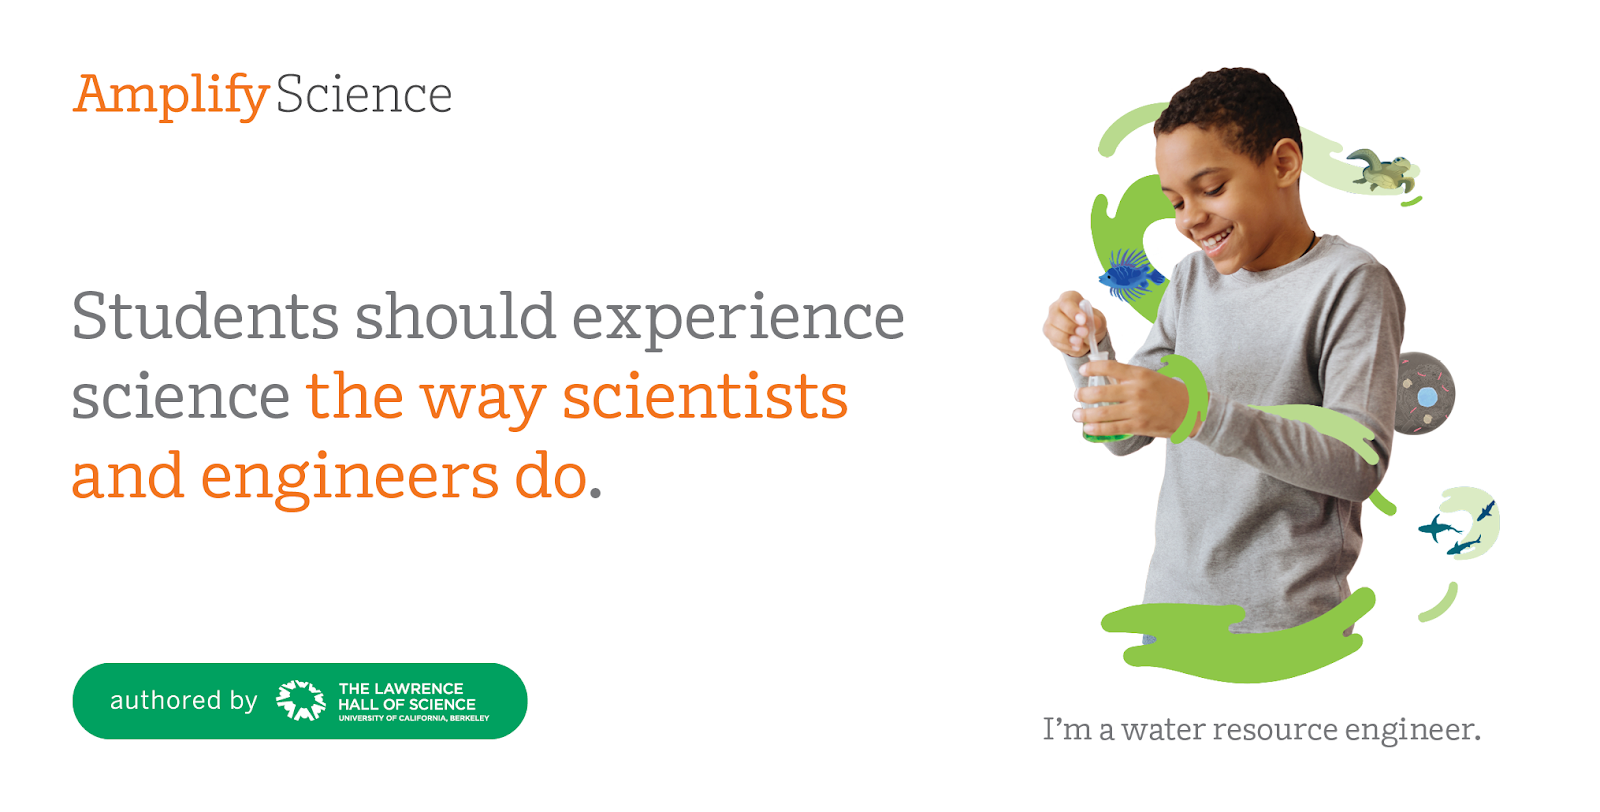 Students should experience science the way scientists and engineers do.